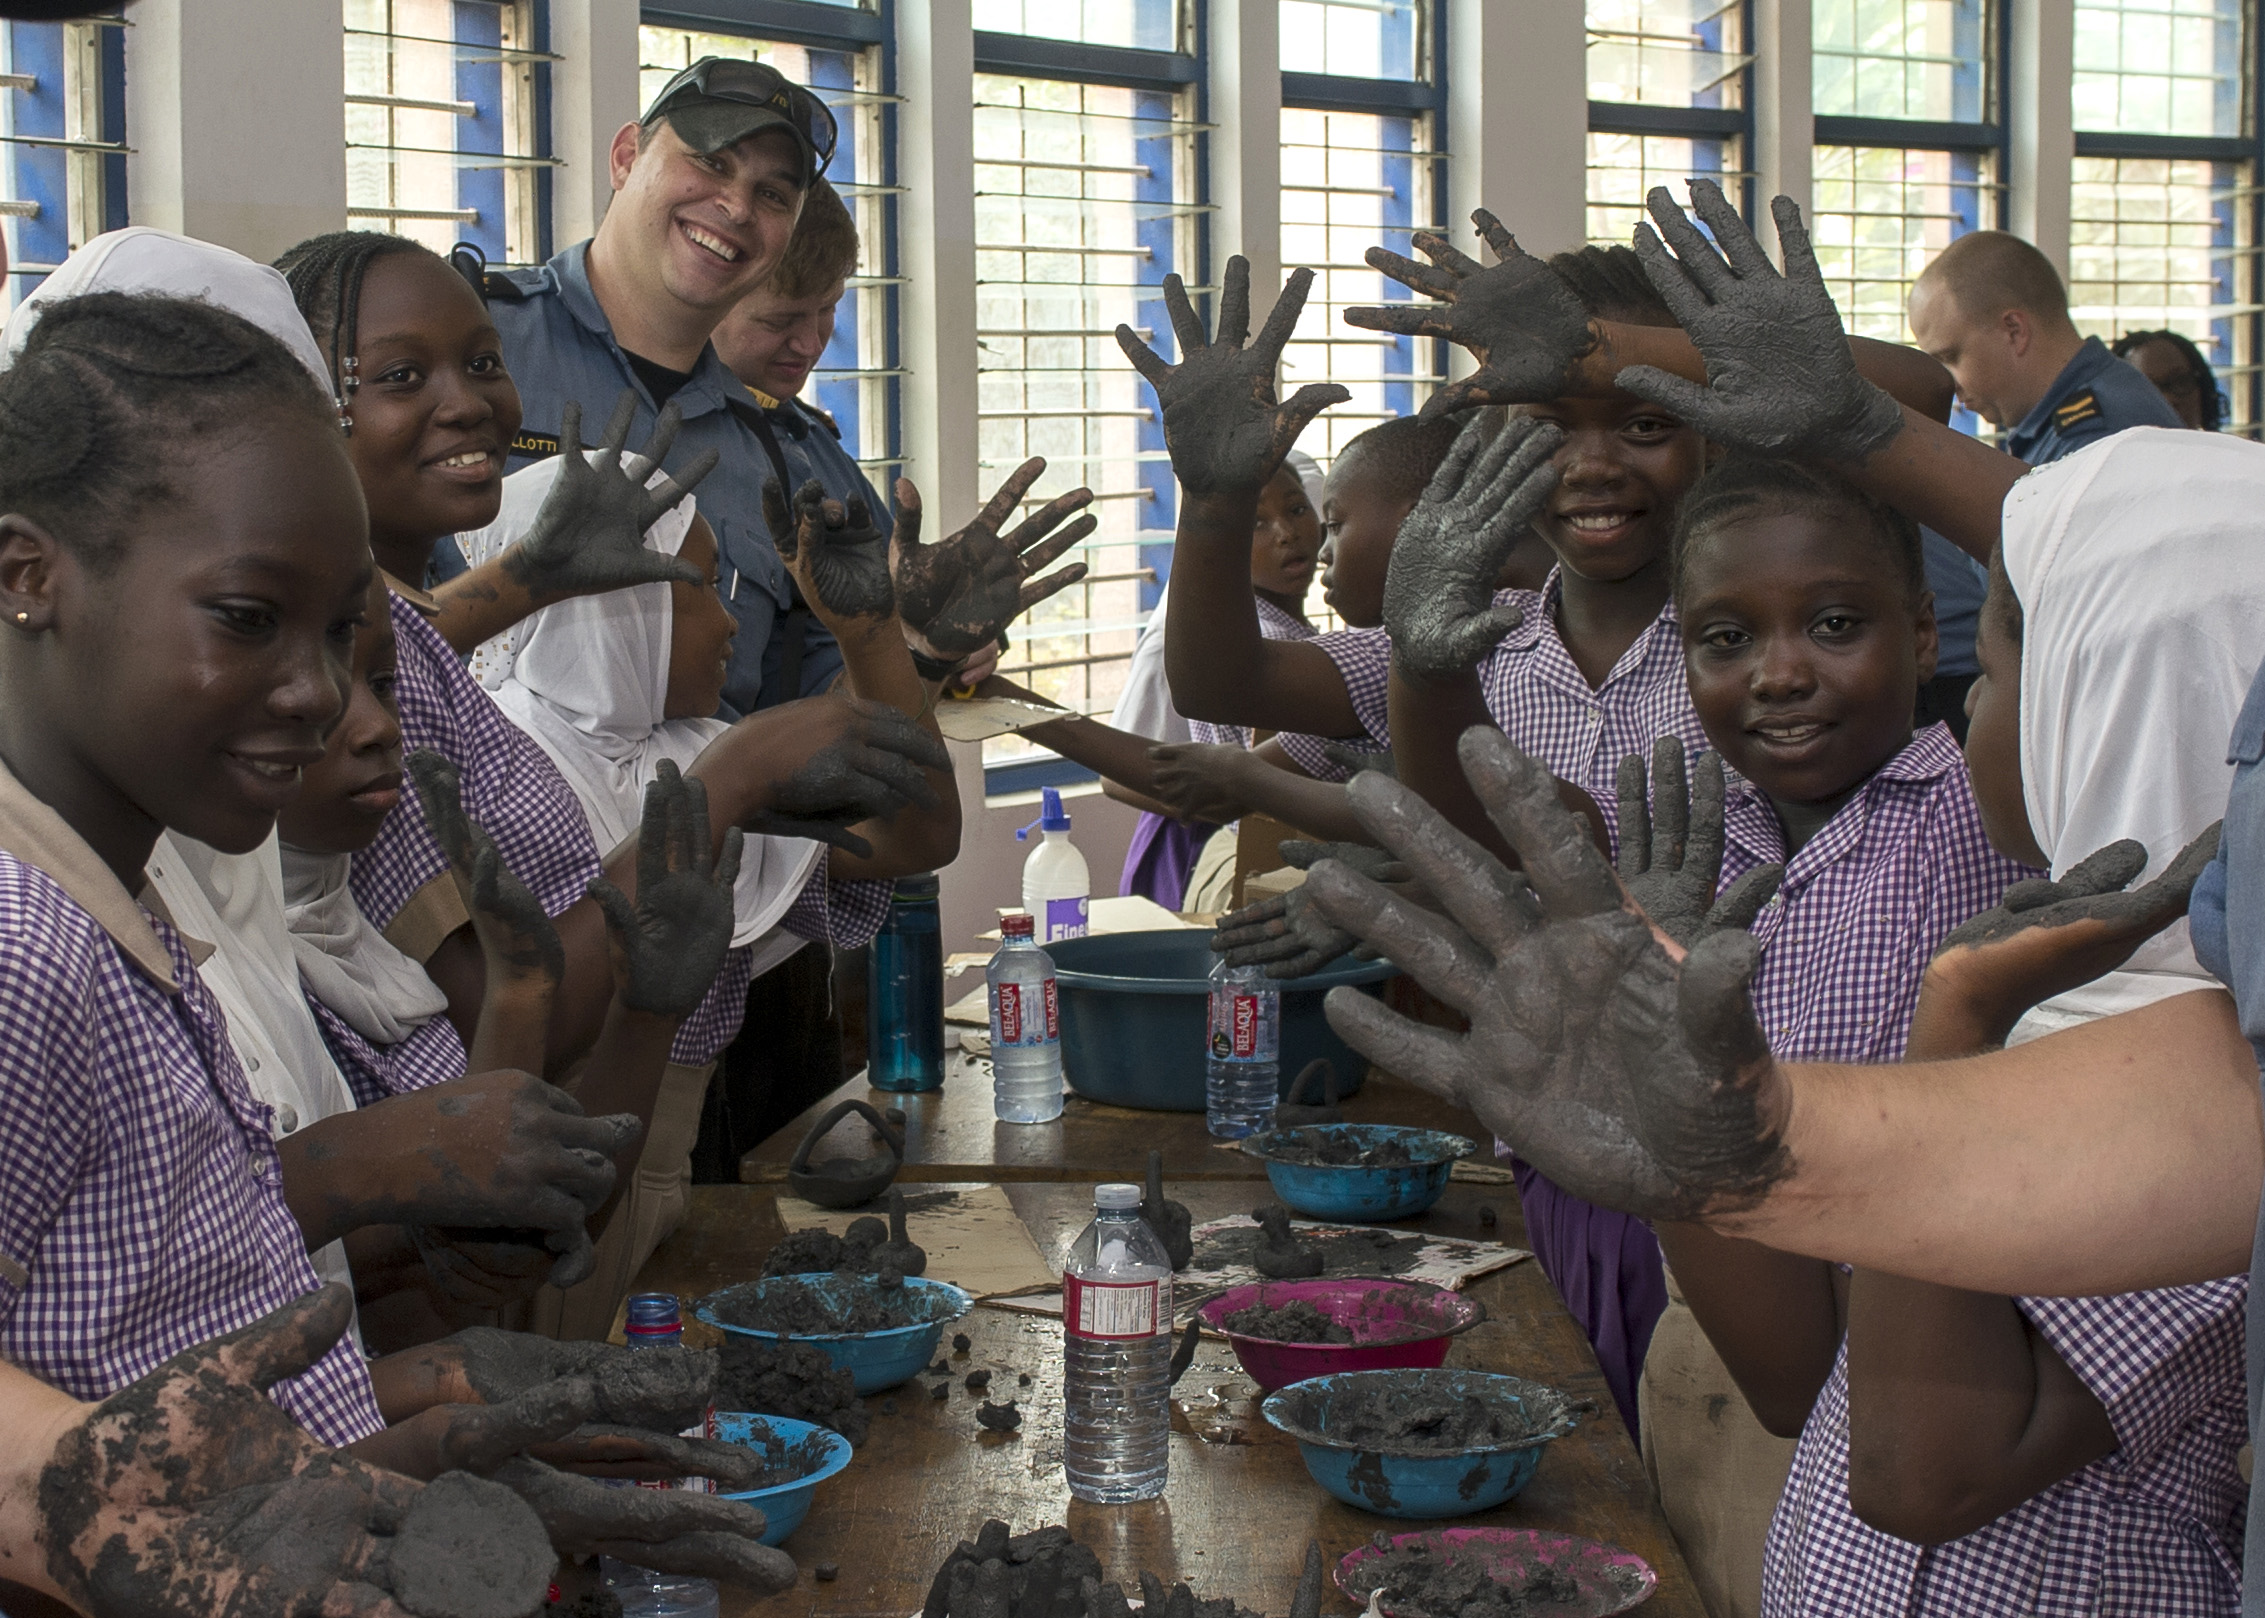 March 21, 2018. Leading Seaman Peter Sayeau (left) and Leading Seaman Edward Kuipers, Members of Her Majesty’s Canadian Ship KINGSTON, do arts and crafts with students at the Nima-Maamobi community Learning center in Accra, Ghana, during Operation PROJECTION, March 21, 2018. Photo: Sgt Shilo Adamson, Canadian Forces Recruiting Group Headquarters, CFB Borden